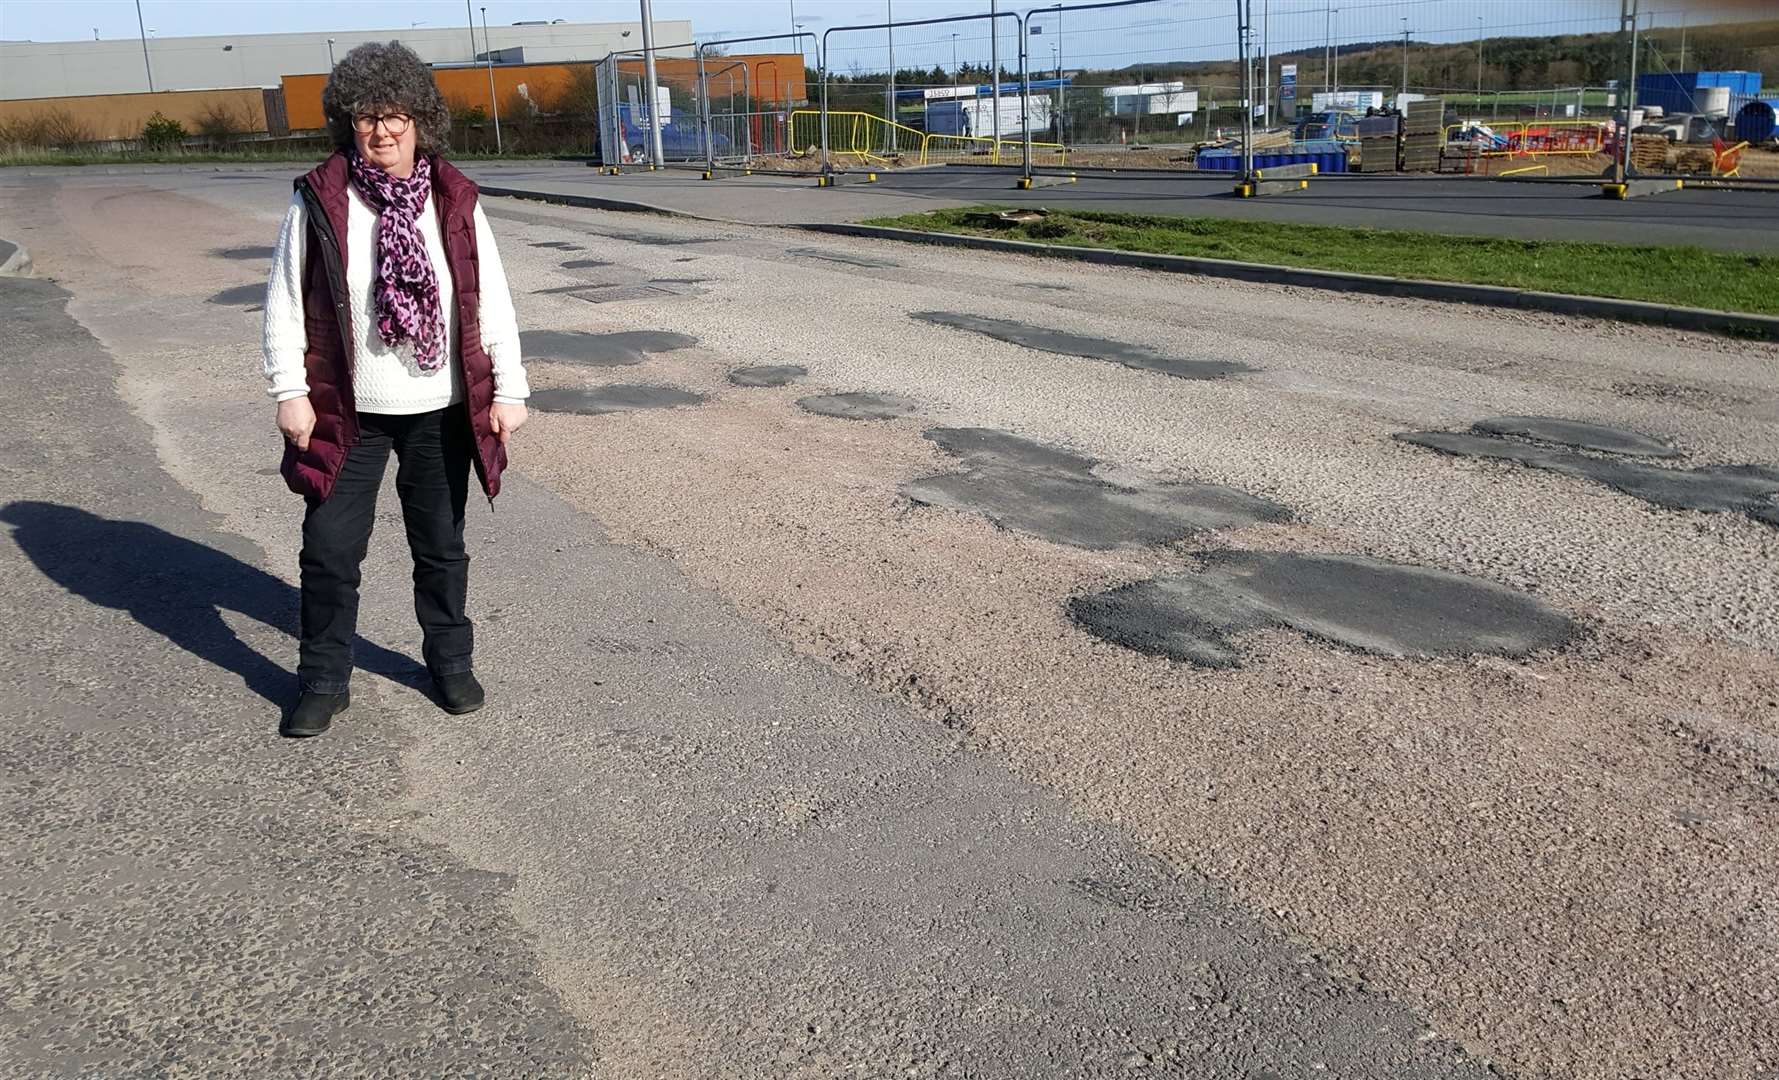 Gillian Owen shows the conditions of the roads at Balmacassie which are in need of work.